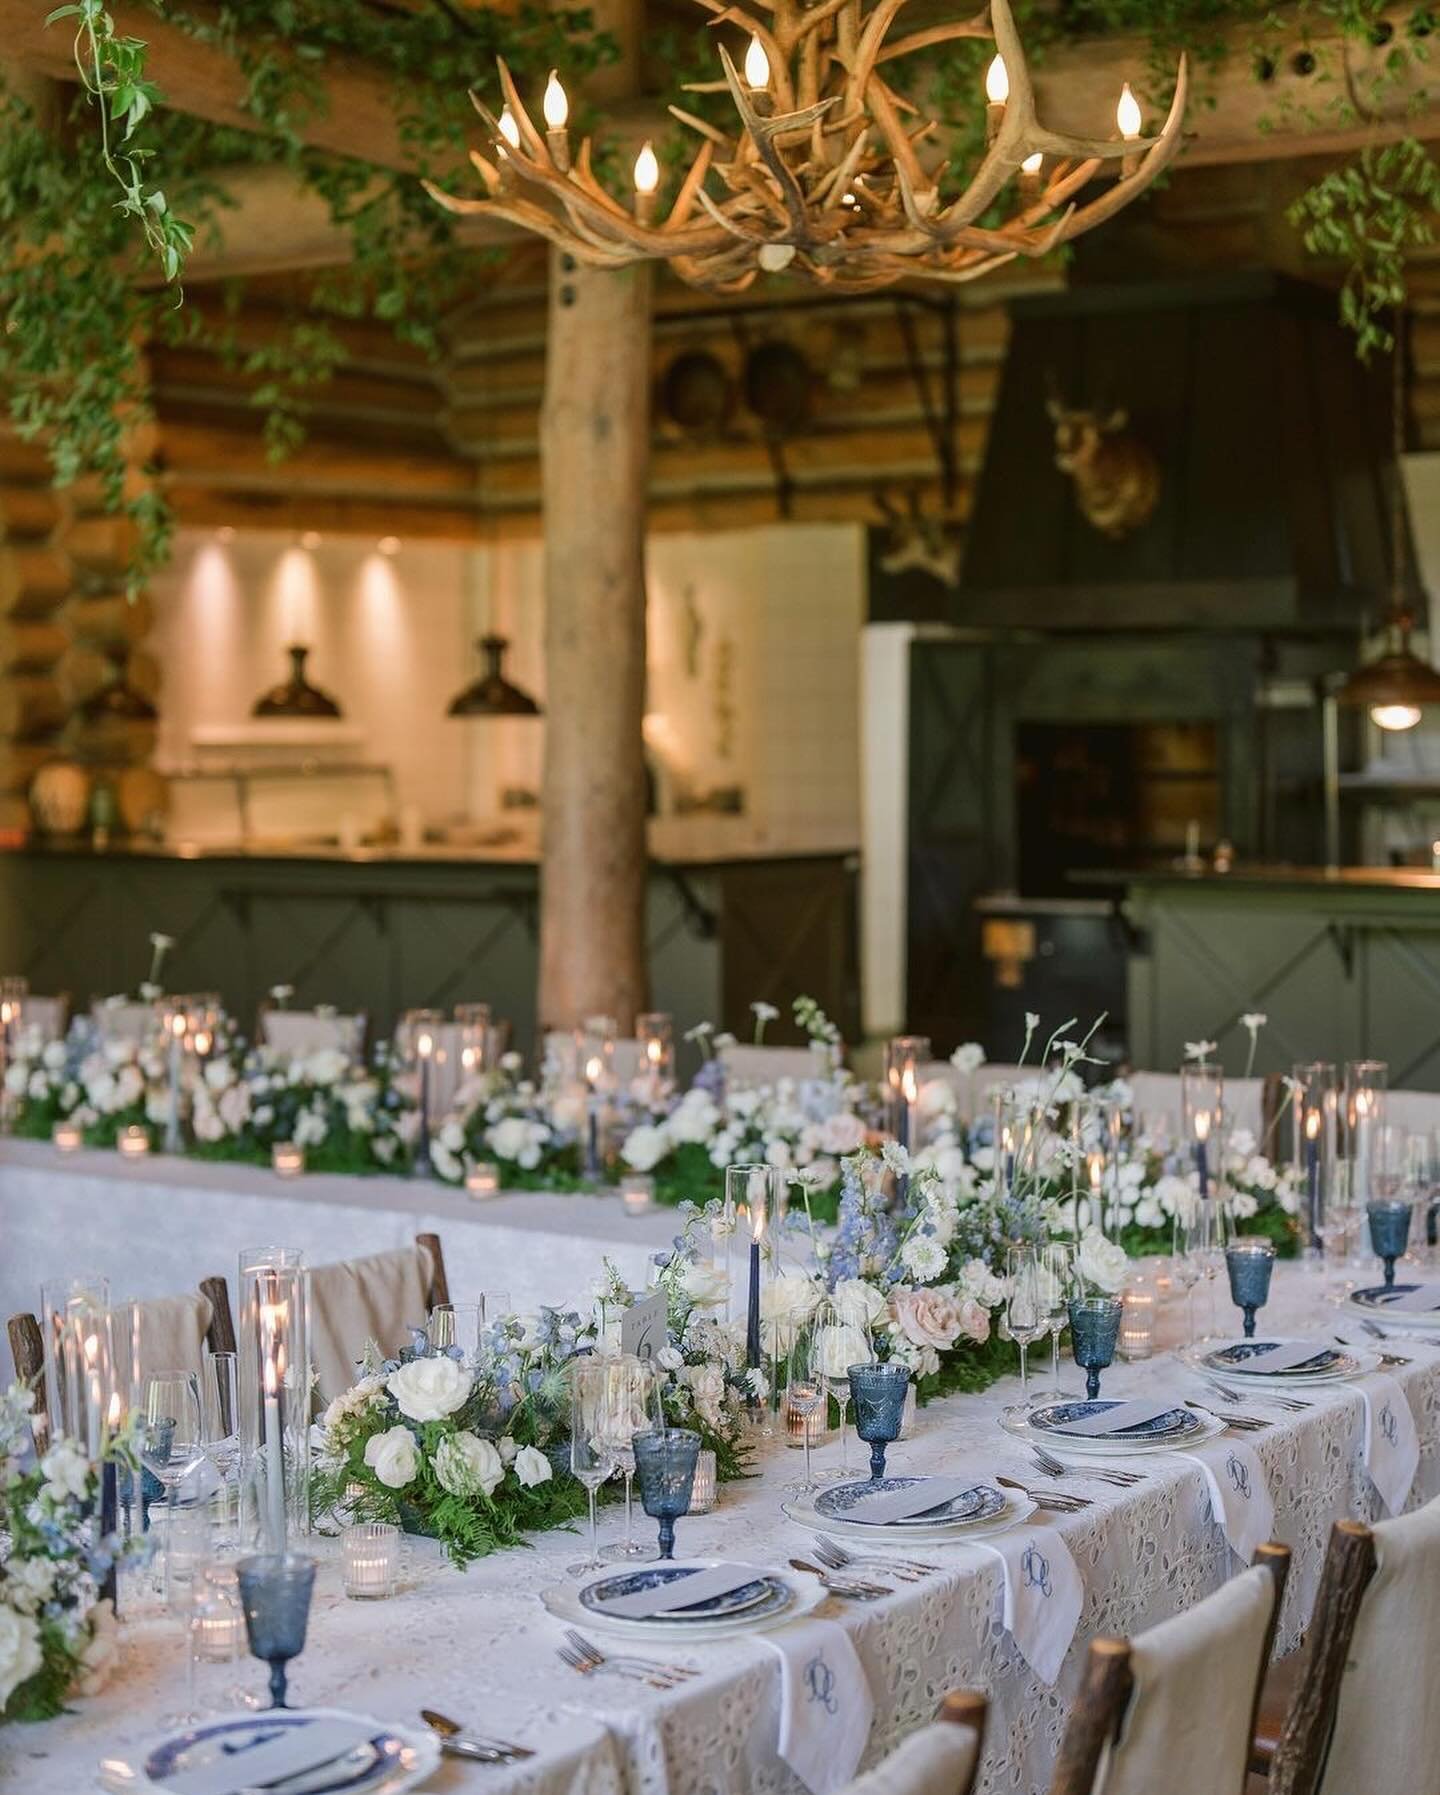 INTO THE BLUE.

This &ldquo;something blue&rdquo; journeyed with the newlyweds and guests alike, manifesting in blooming florals, captivating tablescape decor, and an escort display coveted by all. Far from melancholy, blue infused the celebration wi